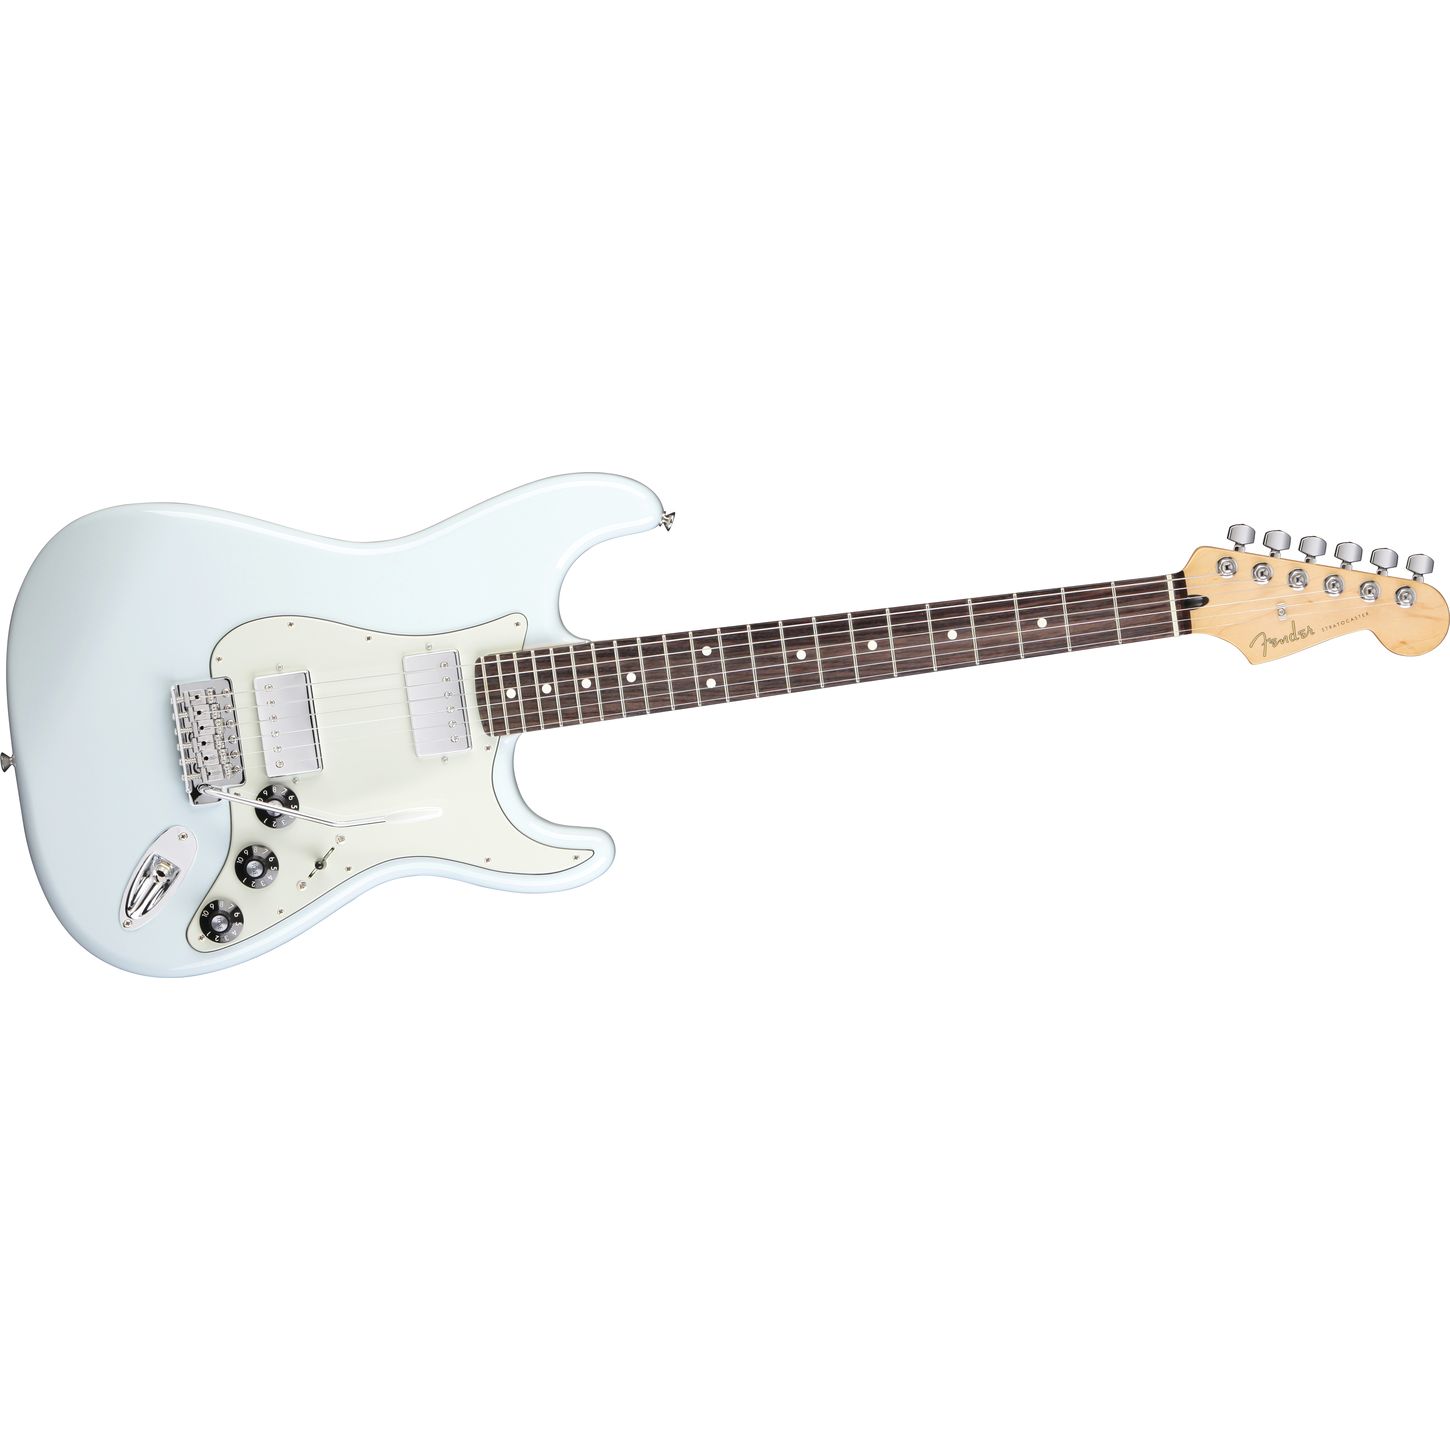 Fender Stratocaster Blacktop Hh Review